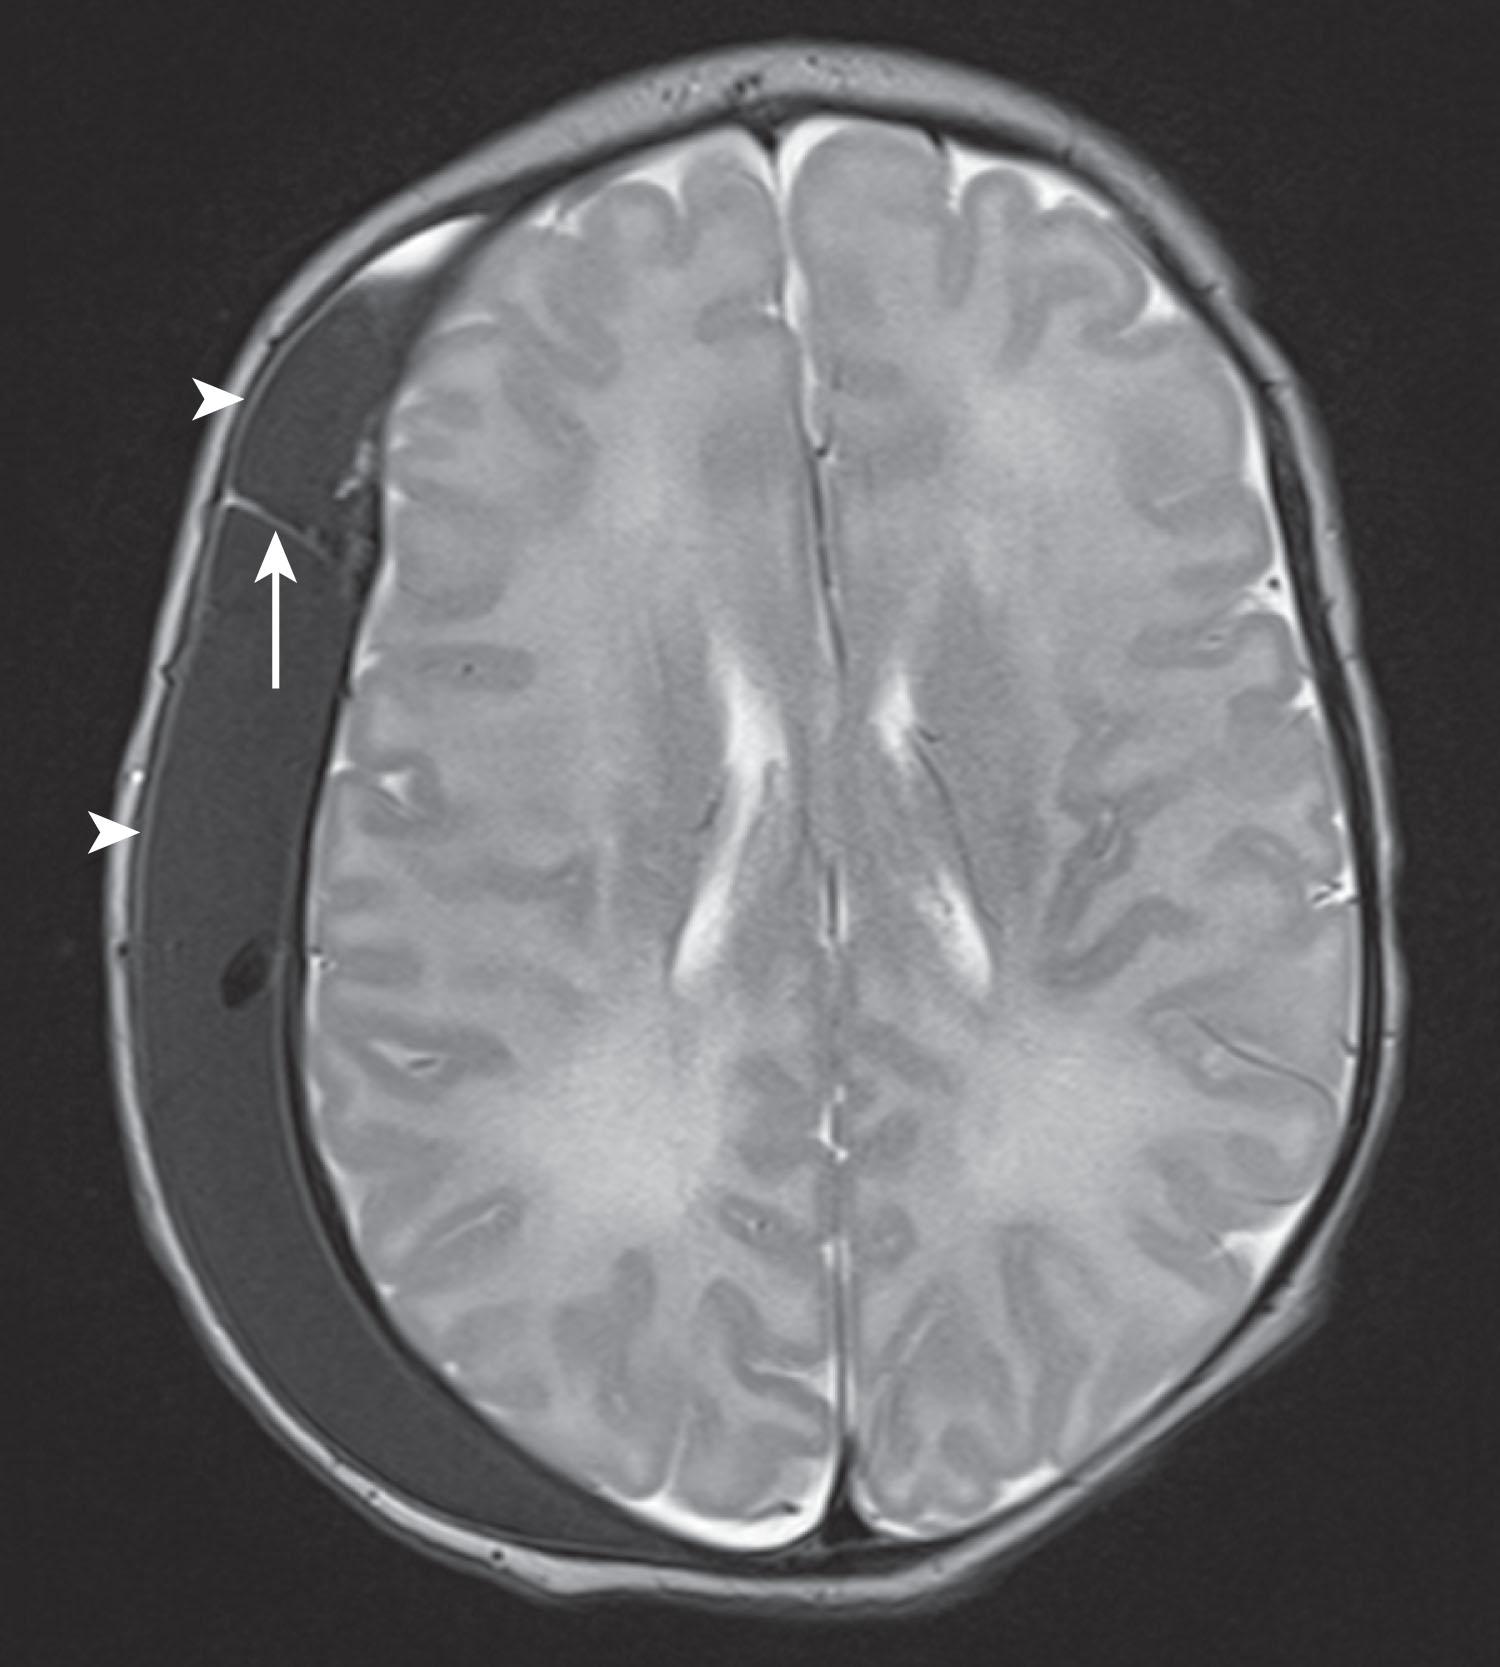 Fig. 40.4, Frontal and parietal cephalhematomas: MRI scan in a 1-day-old infant delivered by vacuum extraction. Clinical diagnosis was subgaleal hemorrhage, because the scalp mass crossed the coronal suture line. However, MRI scan shows separate frontal and parietal cephalhematomas. The arrowheads indicate the periosteum external to the (subperiosteal) hematoma. The arrow indicates stripped periosteum at the coronal suture, leading to the external clinical appearance suggestive of a subgaleal hematoma. The intracerebral structures are normal.